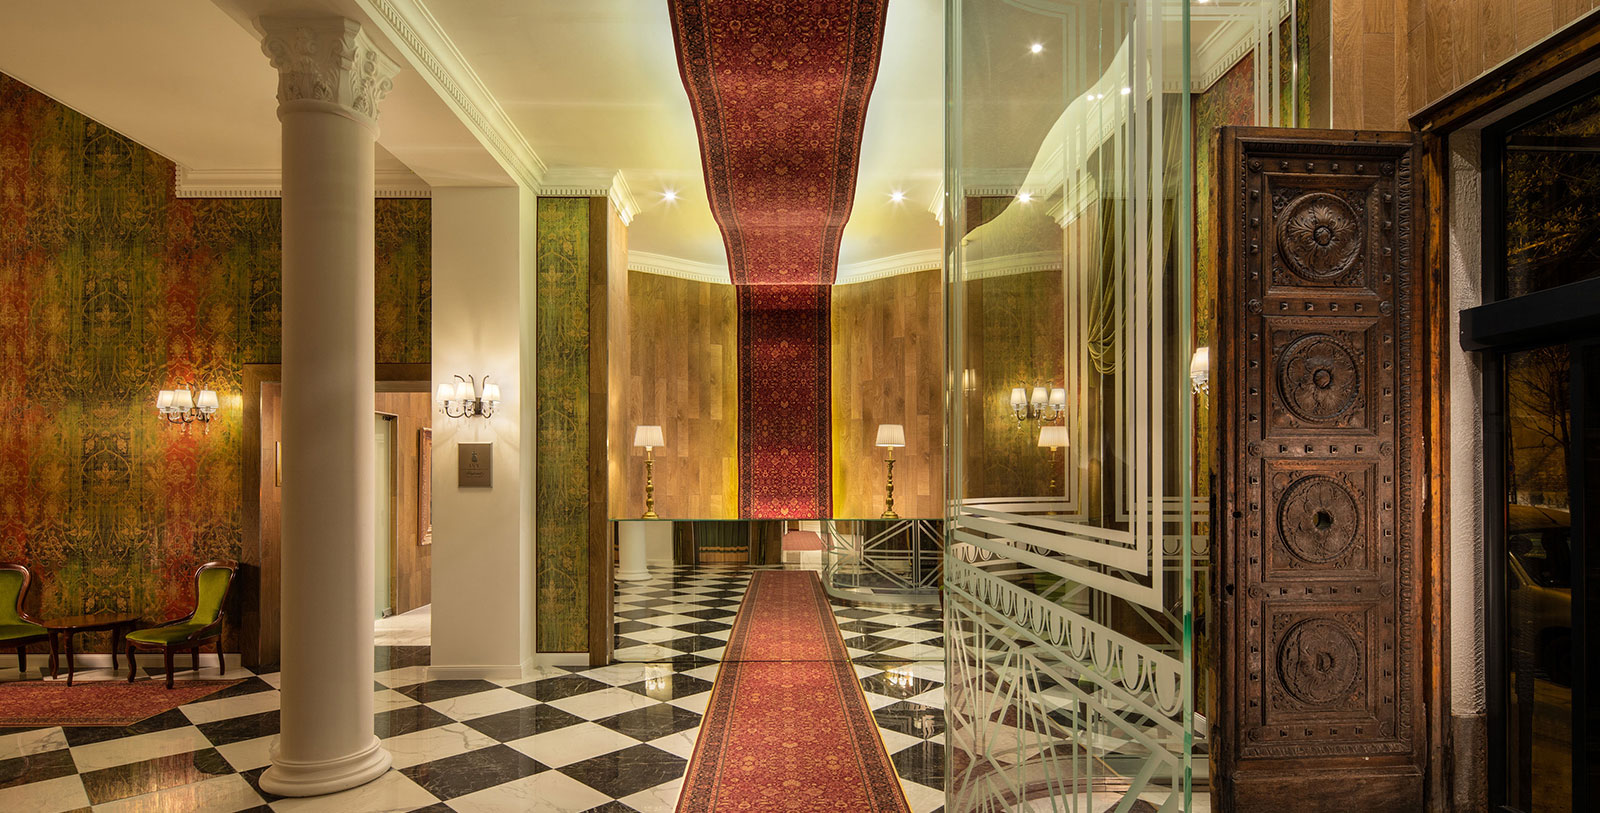 Image of Lobby, Mystery Hotel Budapest, 1896, Member of Historic Hotels Worldwide, Budapest, Hungary, Discover